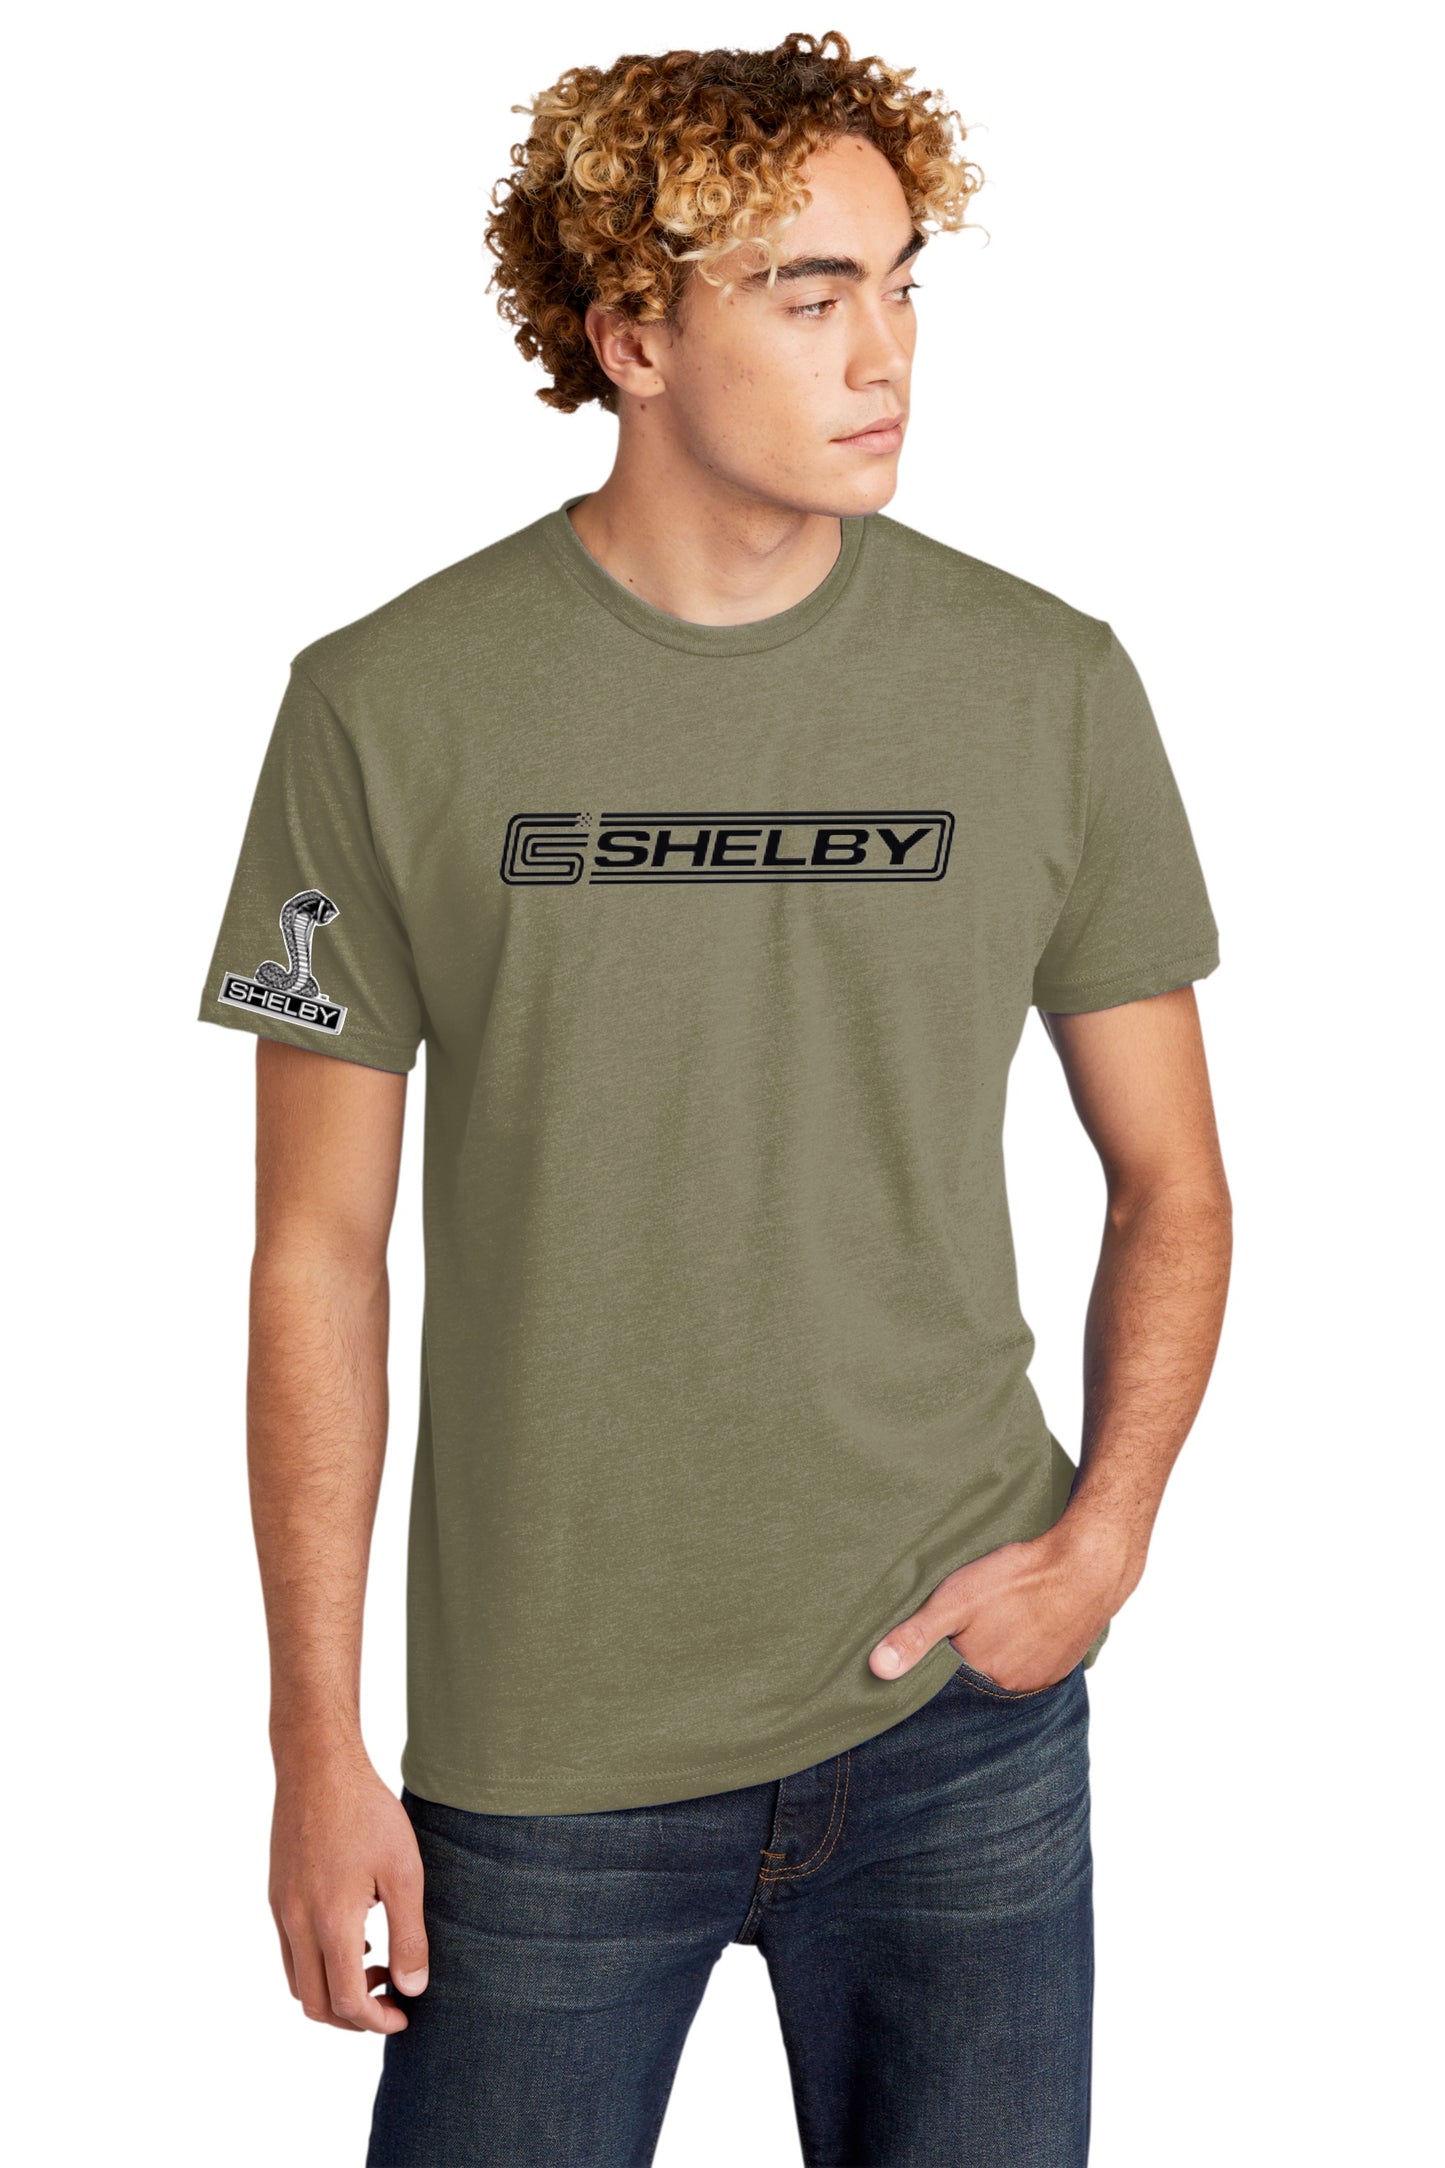 Licensed Shelby GT500 Muscle Car Tee